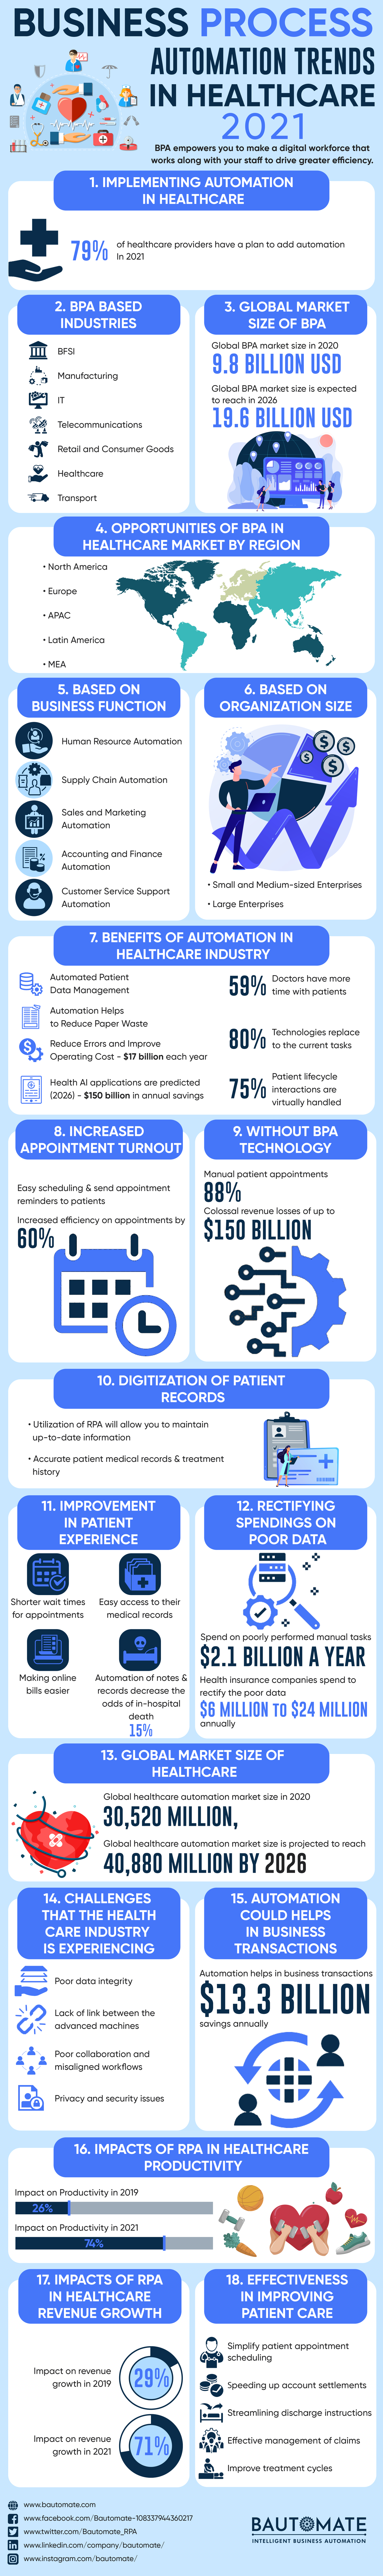 Business Process Automation Trends in Healthcare – 2021